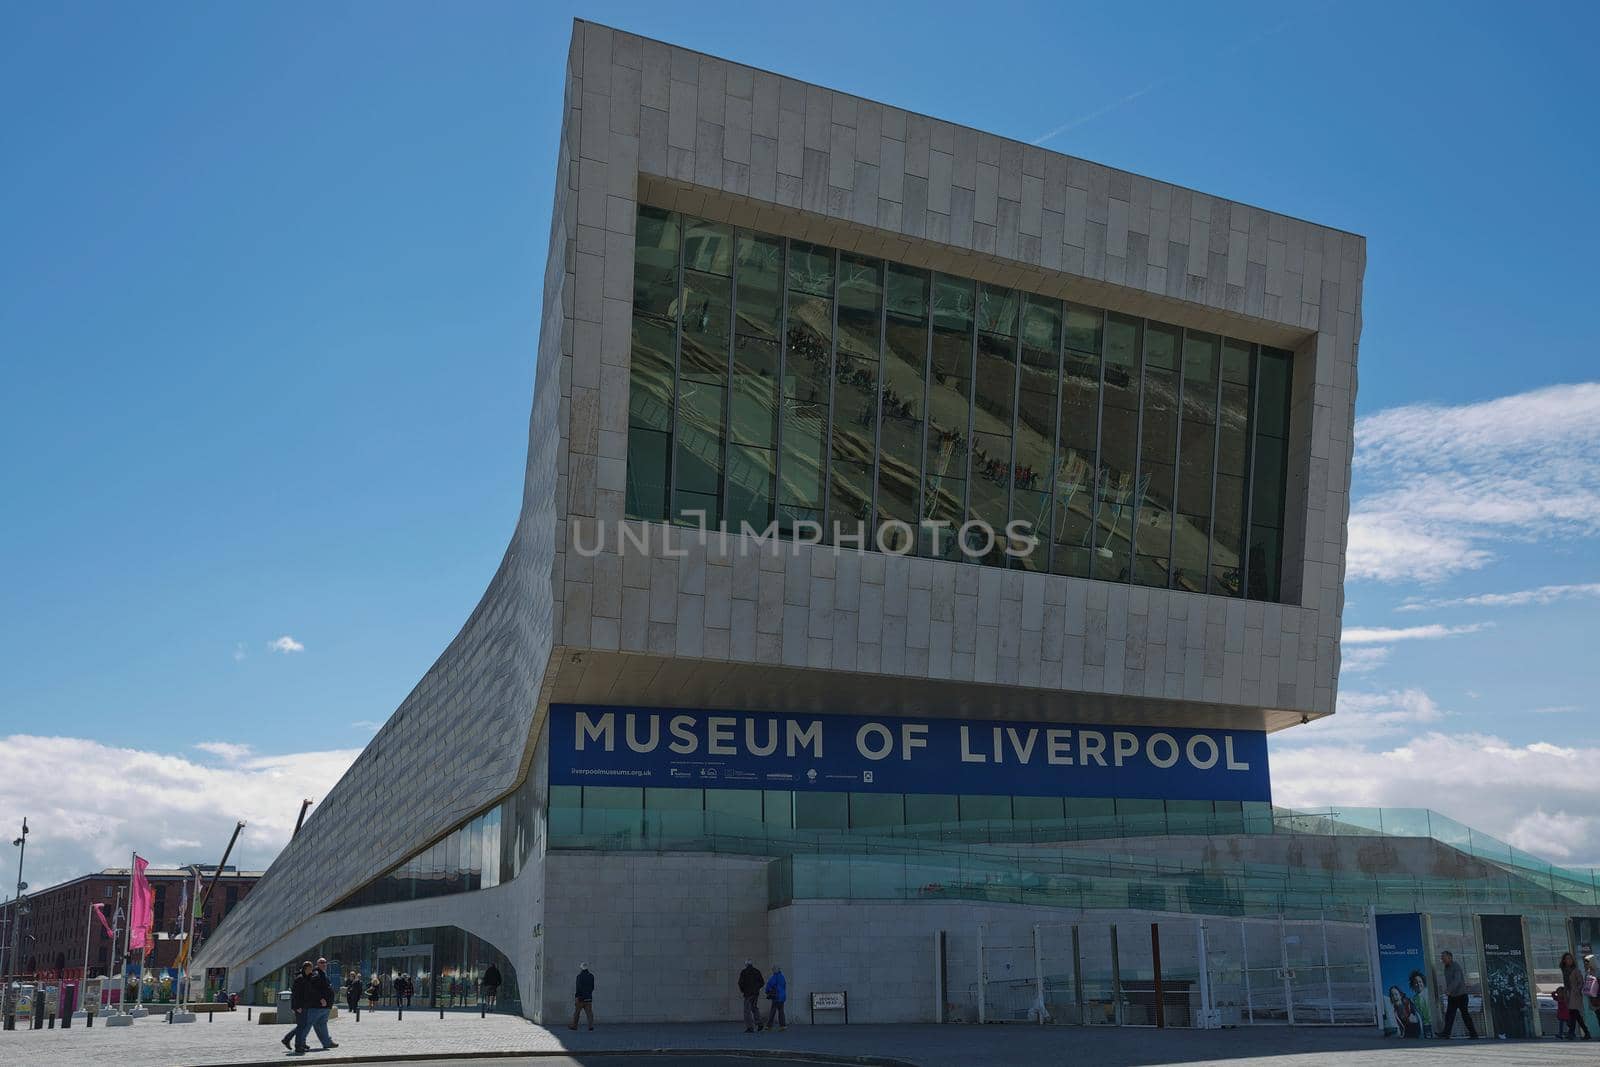 LIVERPOOL, ENGLAND, UK - JUNE 07, 2017: The Museum of Liverpool opened a year ago it reflects the city's global significance through its unique geography, history and culture in Liverpool